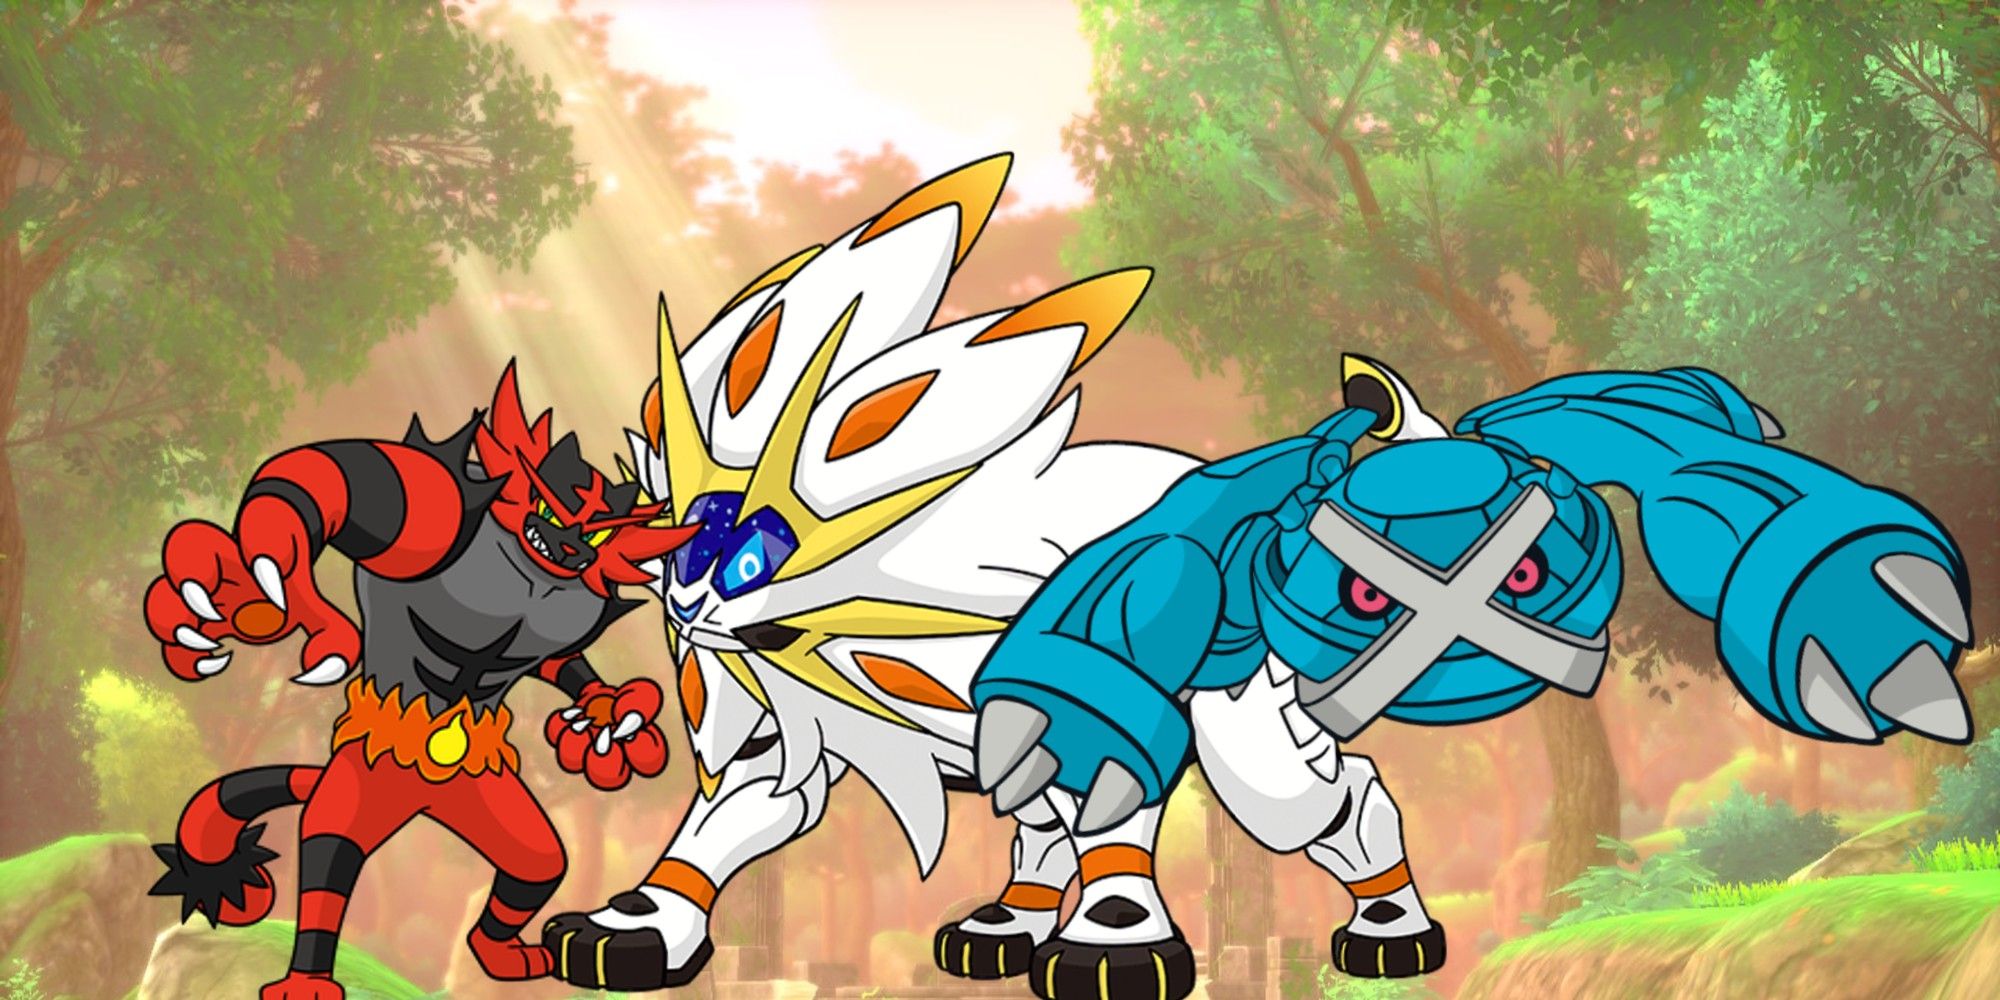 3 Pokemon in a line: Incineroar, Solgaleo, and Metagross. The background is sunny.